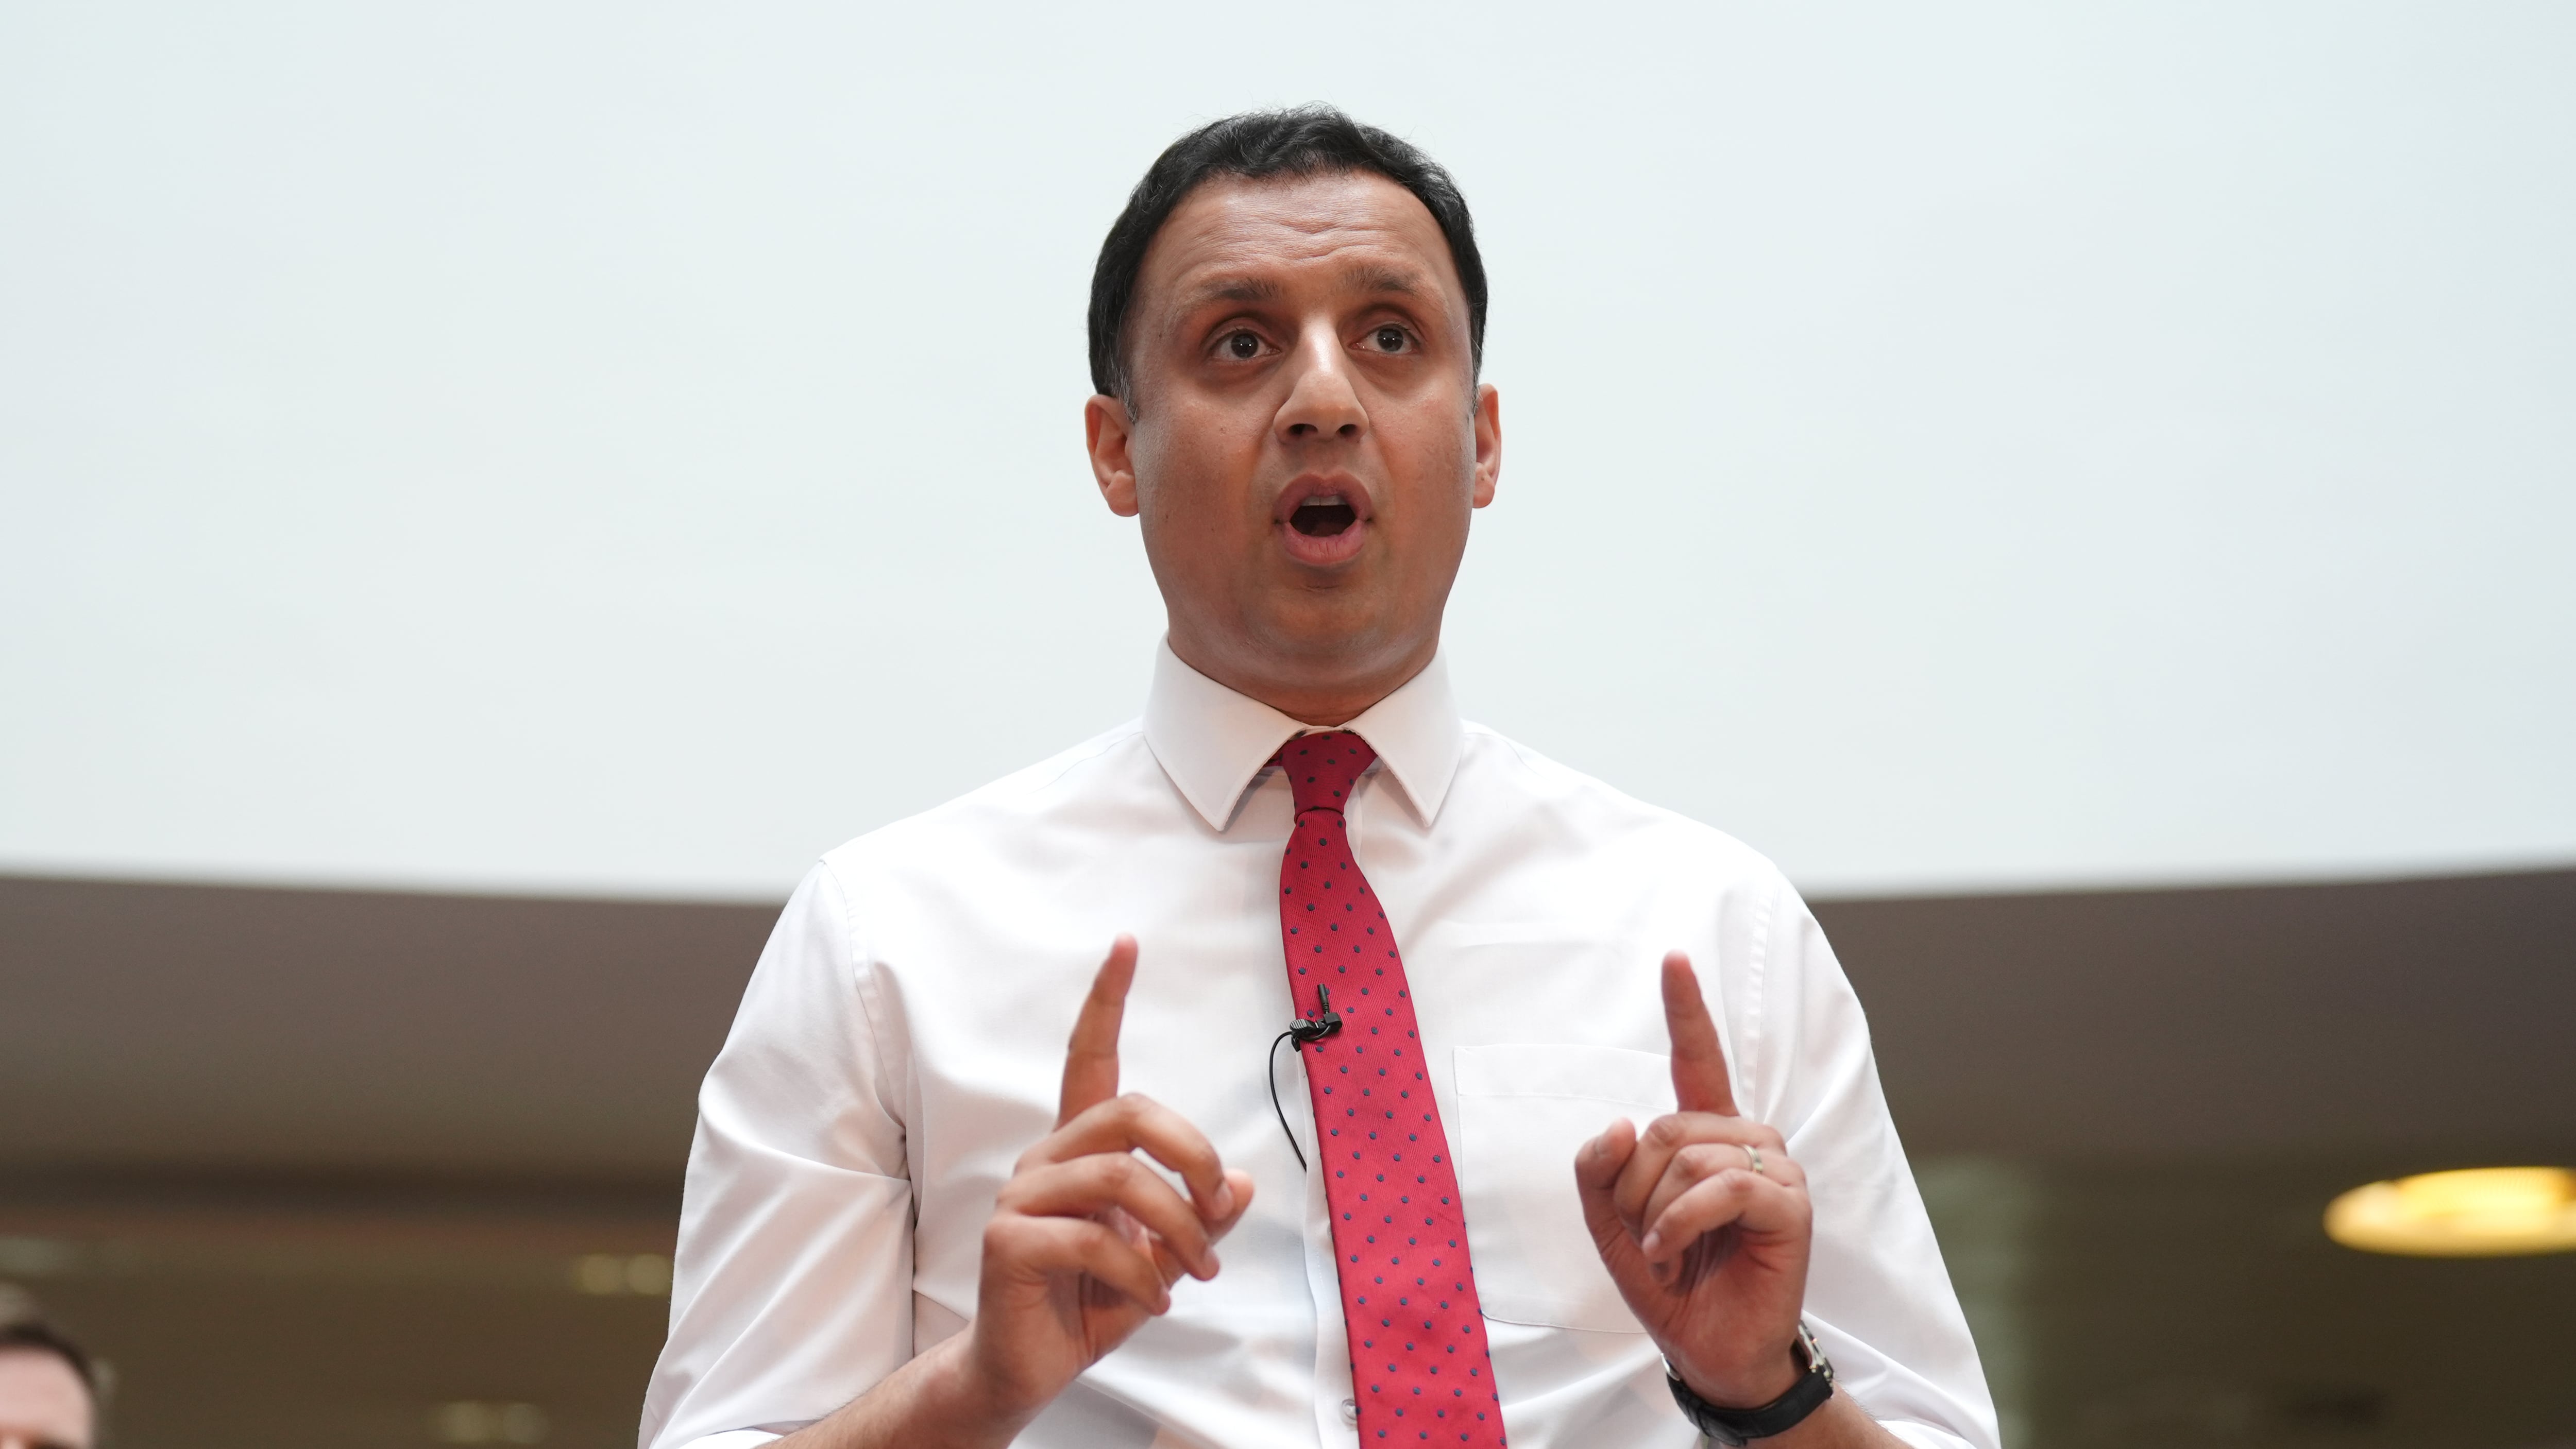 Anas Sarwar said he is ‘confident’ all Scottish Labour candidates have ‘behaved appropriately’ as the General Election betting scandal widened